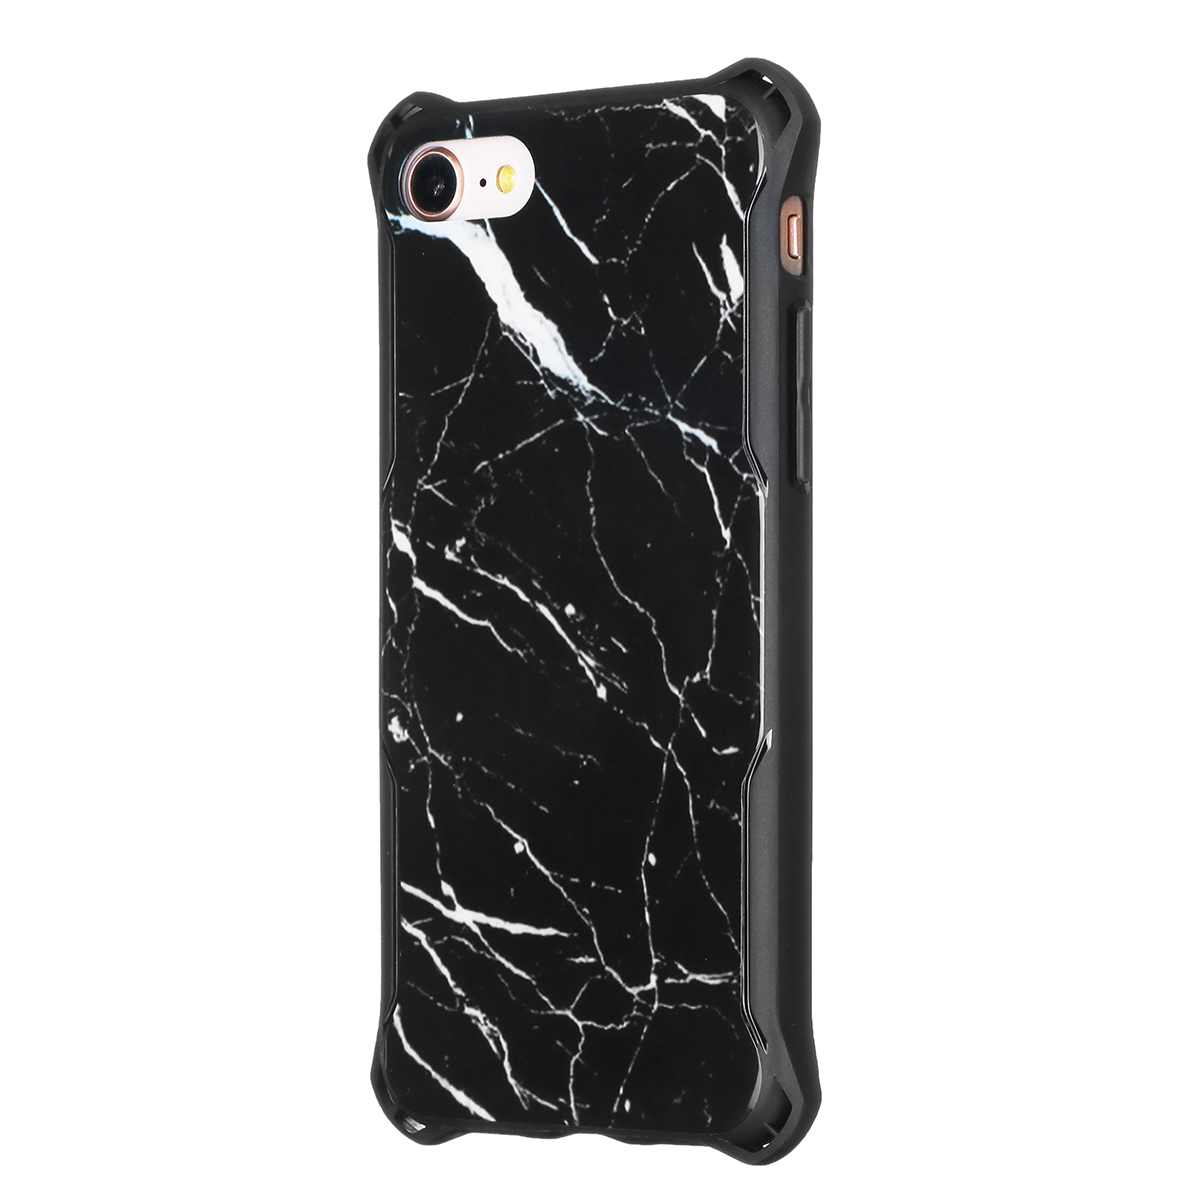 AUGIENB-Marble-Textured-Soft-TPU-Protective-Case-For-For-iPhone-XXS88-Plus77-Plus6s6s-Plus66-Plus-1397754